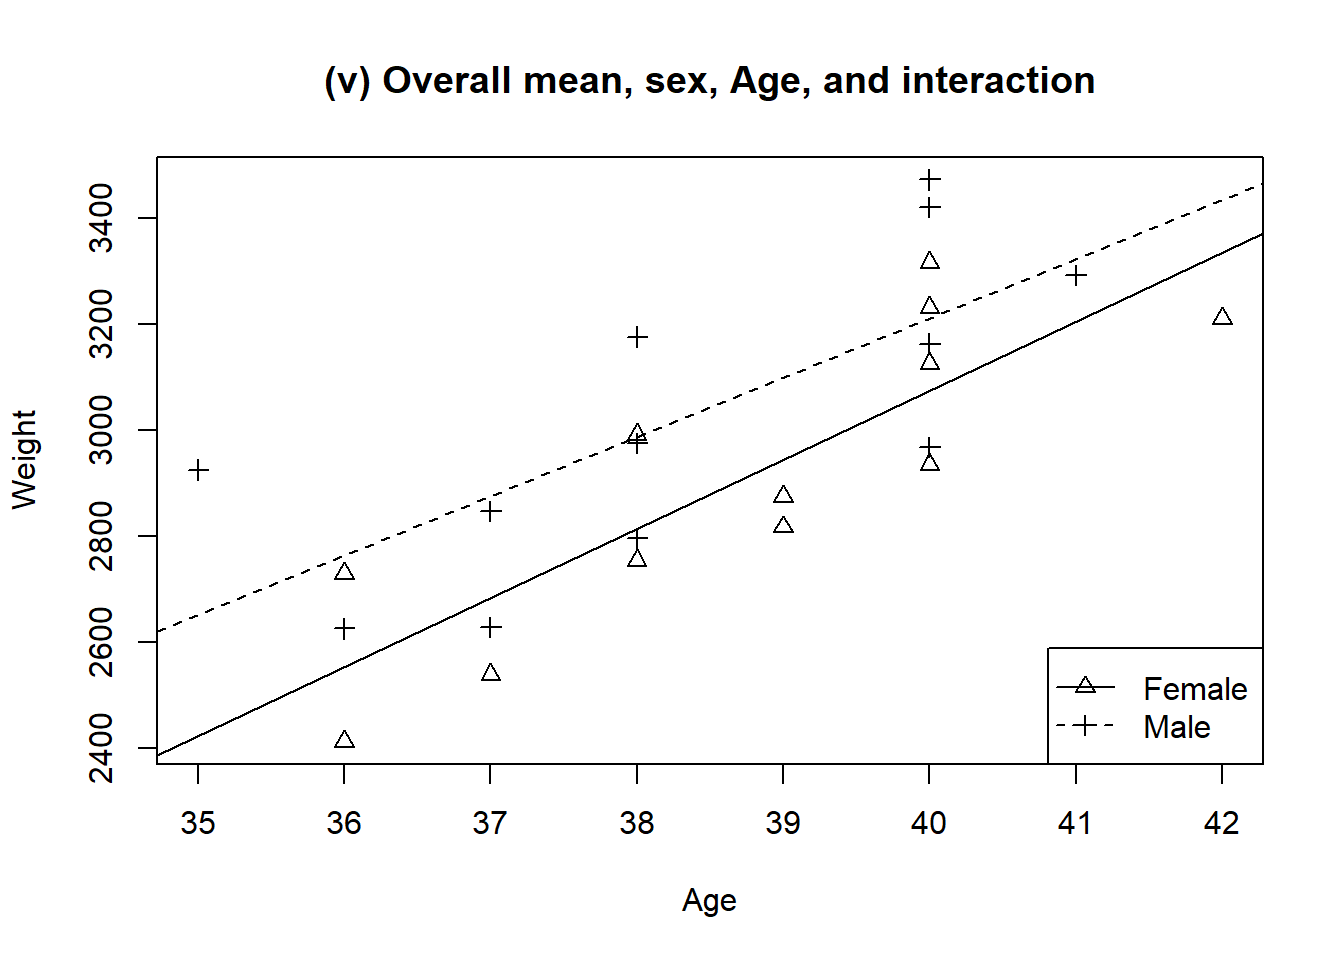 Predicted baby weights using different slopes and intercepts for each sex